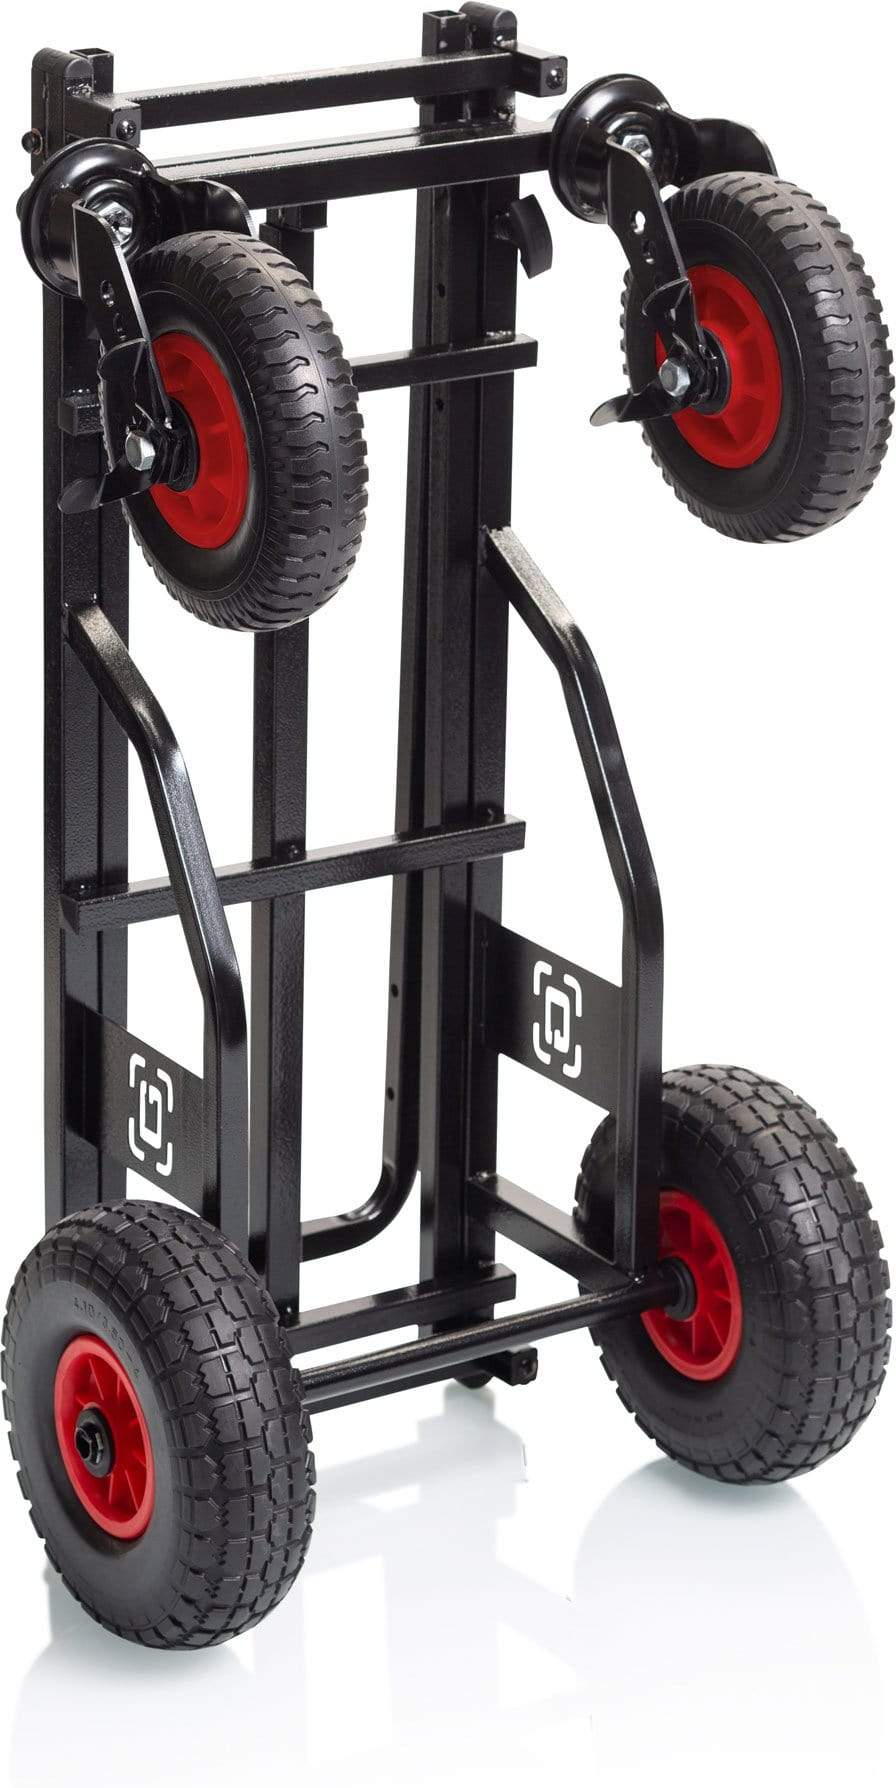 Gator GFW-UTL-CART52AT All Terrain Utility Cart - ProSound and Stage Lighting